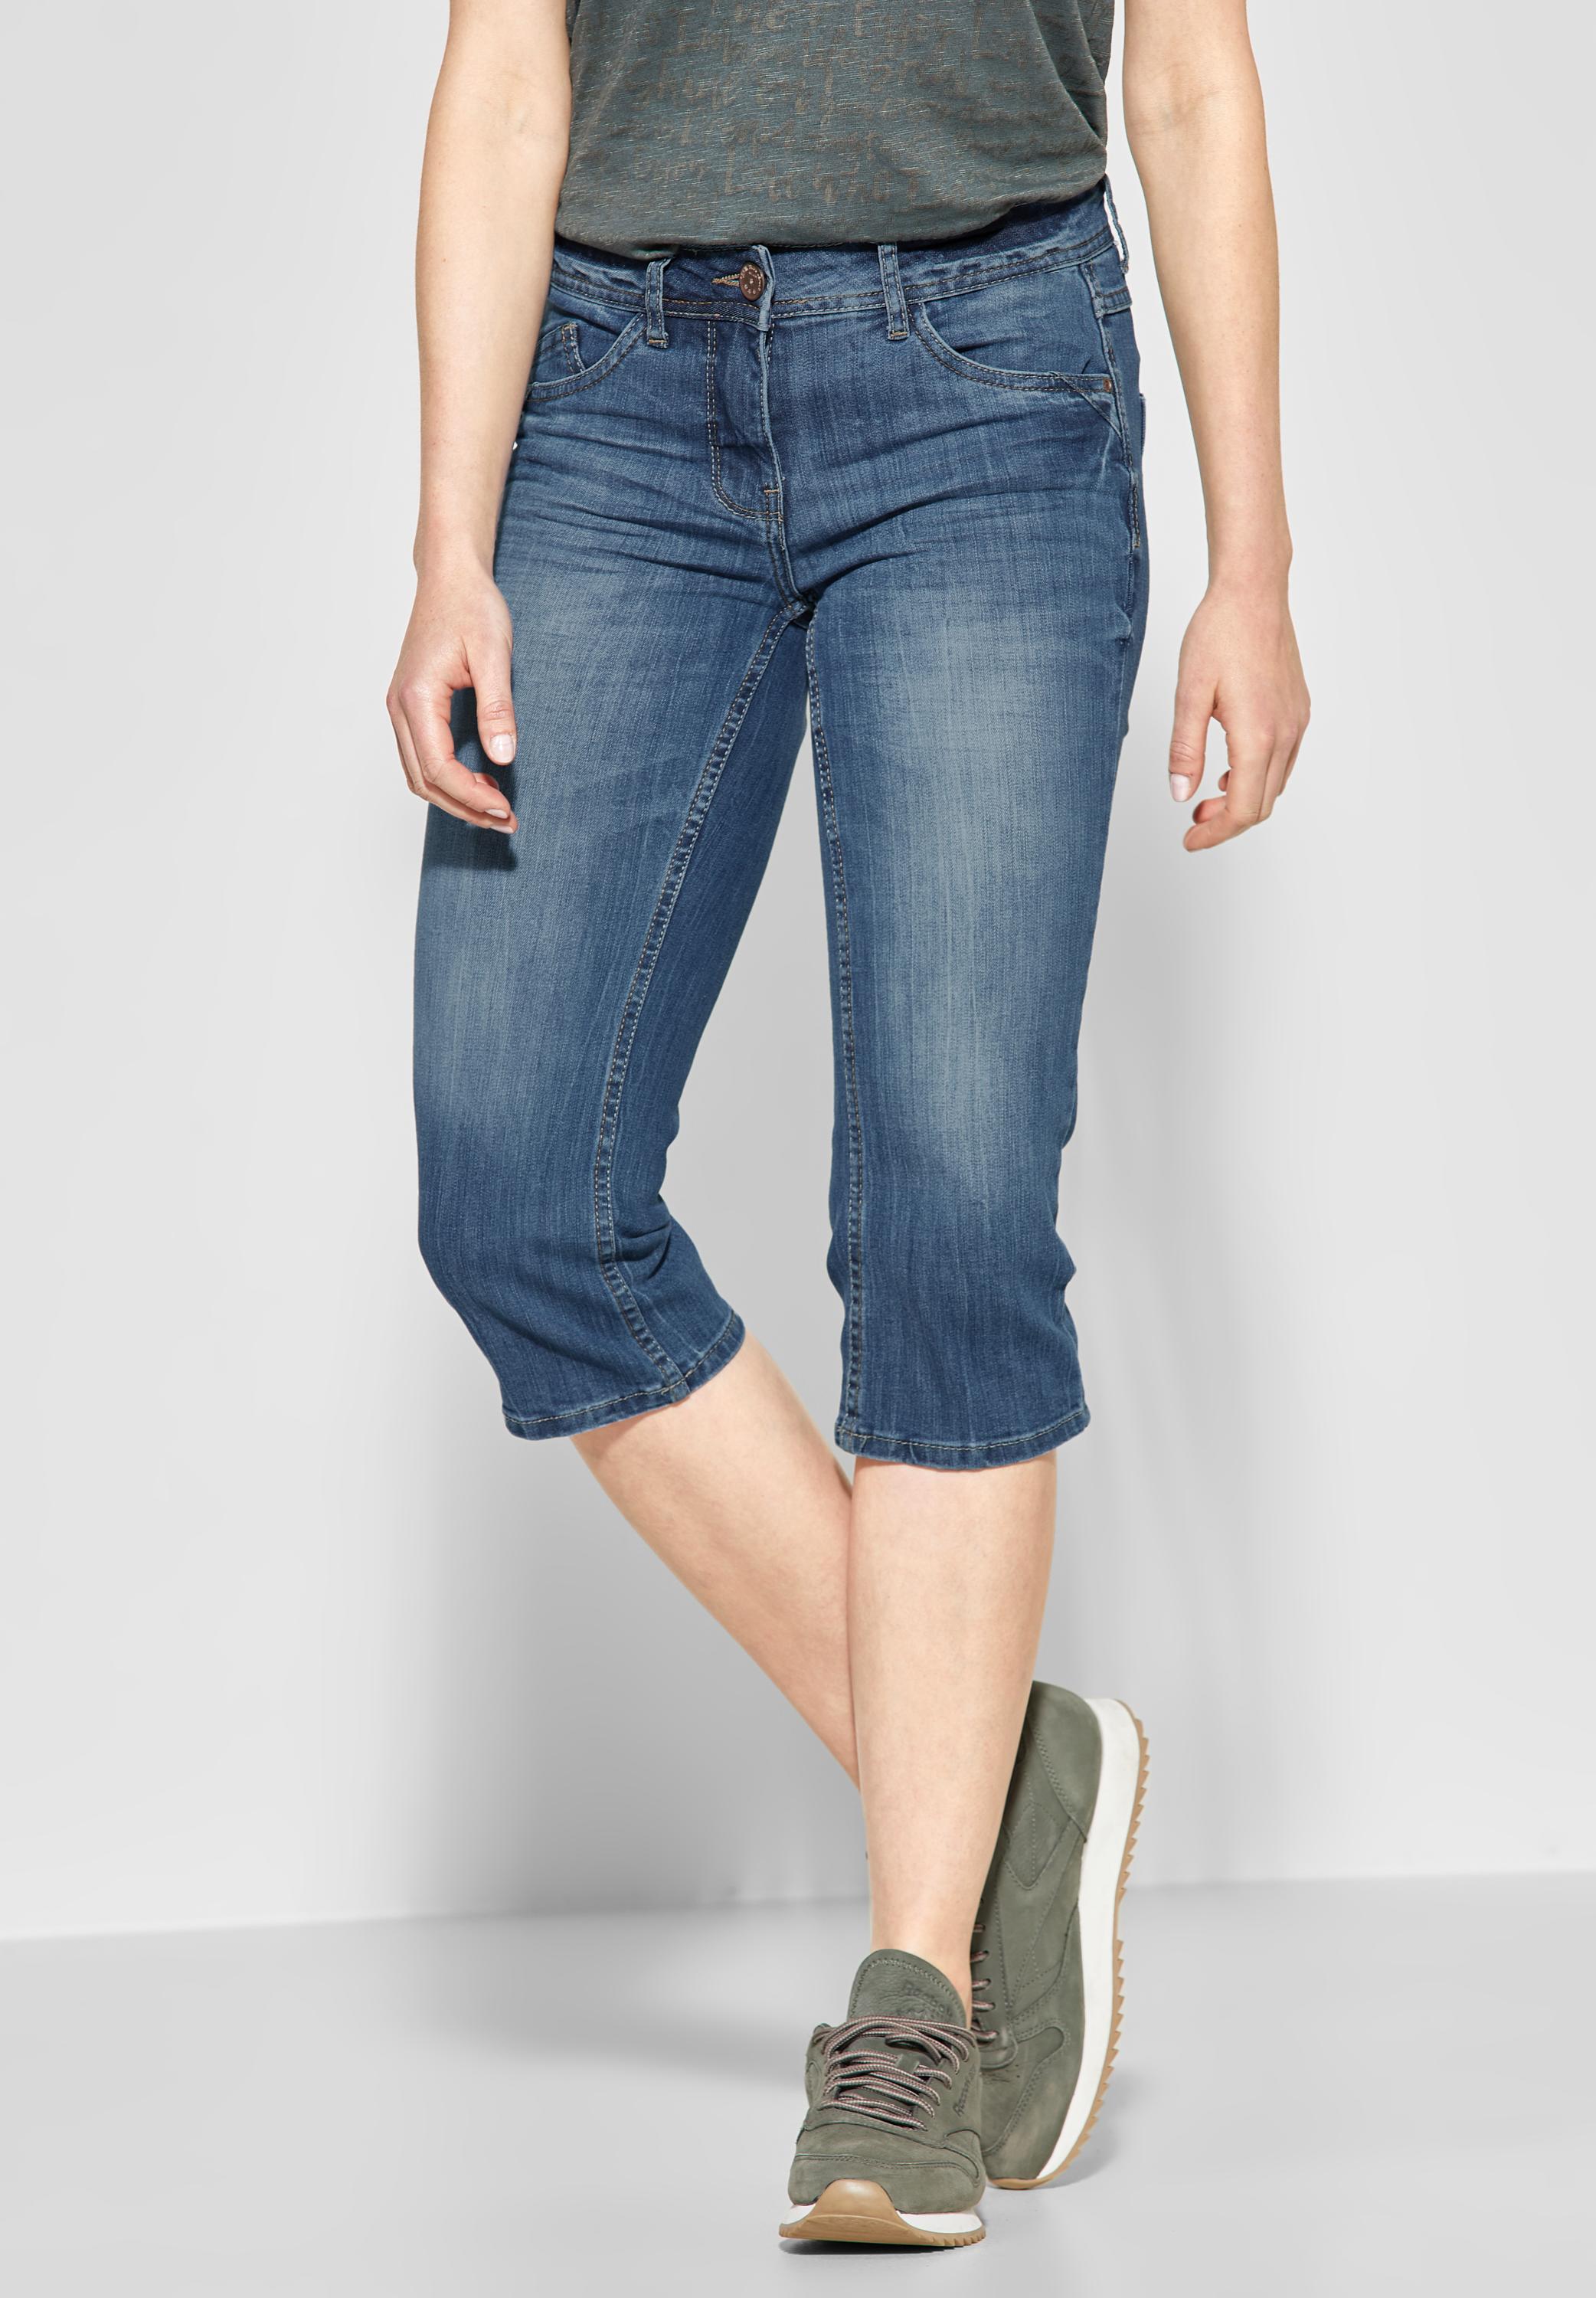 Kano Aarde financieel CECIL 3/4 Jeans Charlize in Authentic Used Wash B372298-10275 - CONCEPT Mode